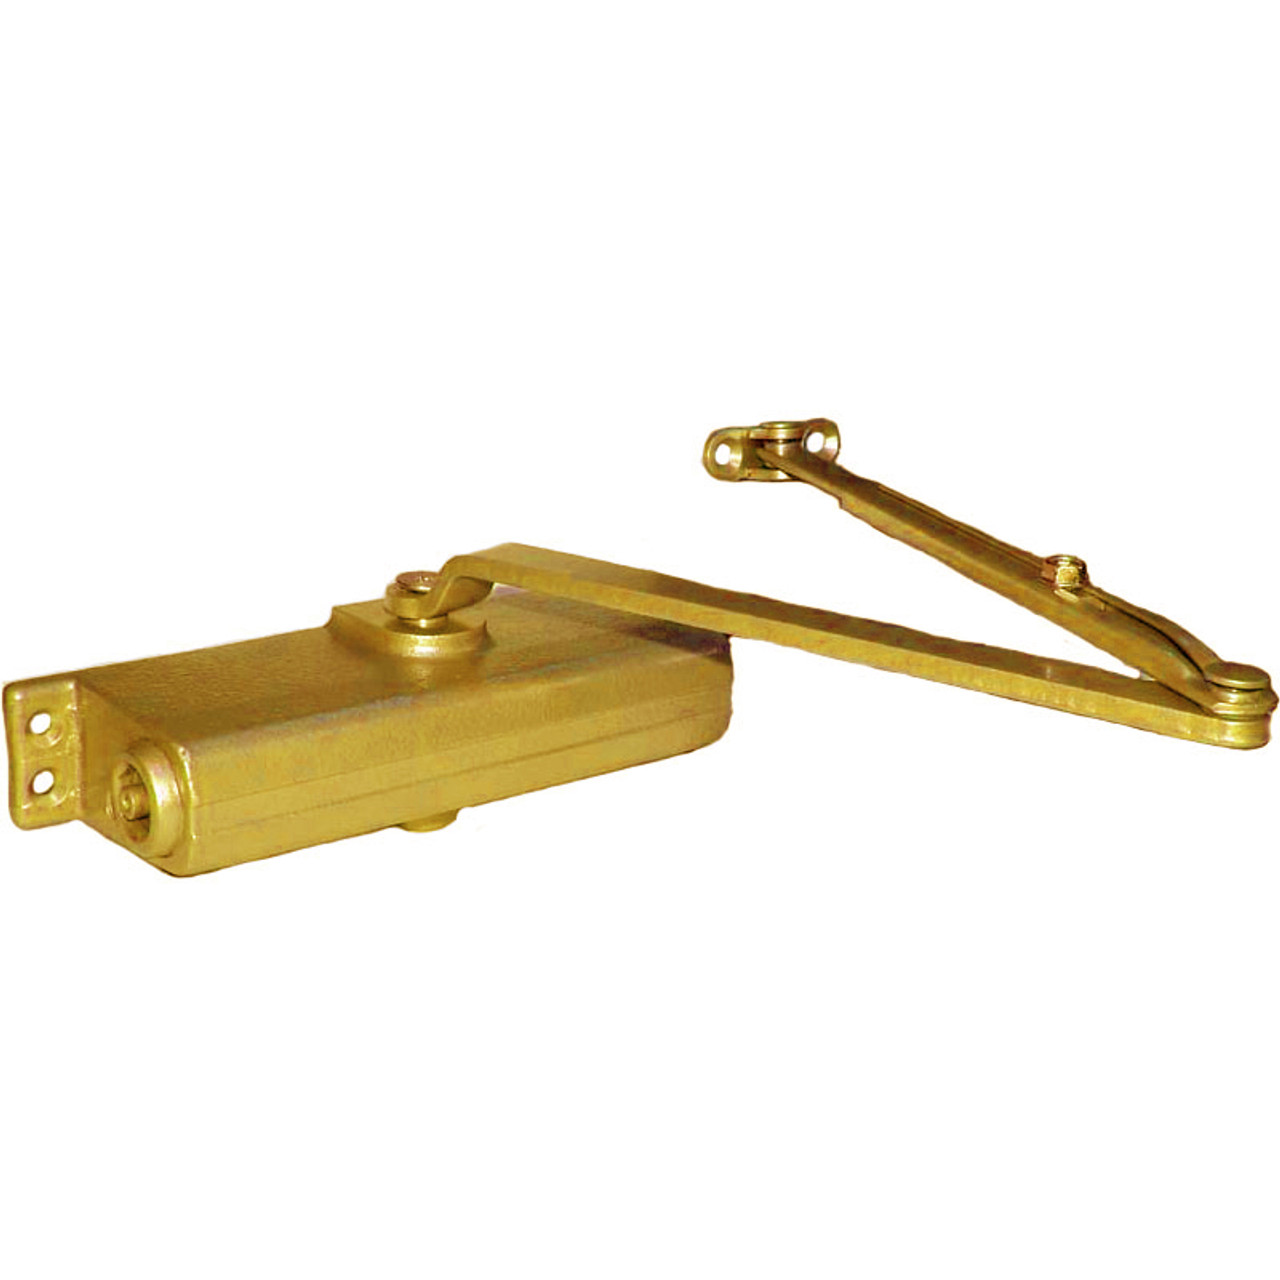 1261-HEDA-LH-BRASS LCN Door Closer with Hold Open Extra Duty Arm in Brass Finish